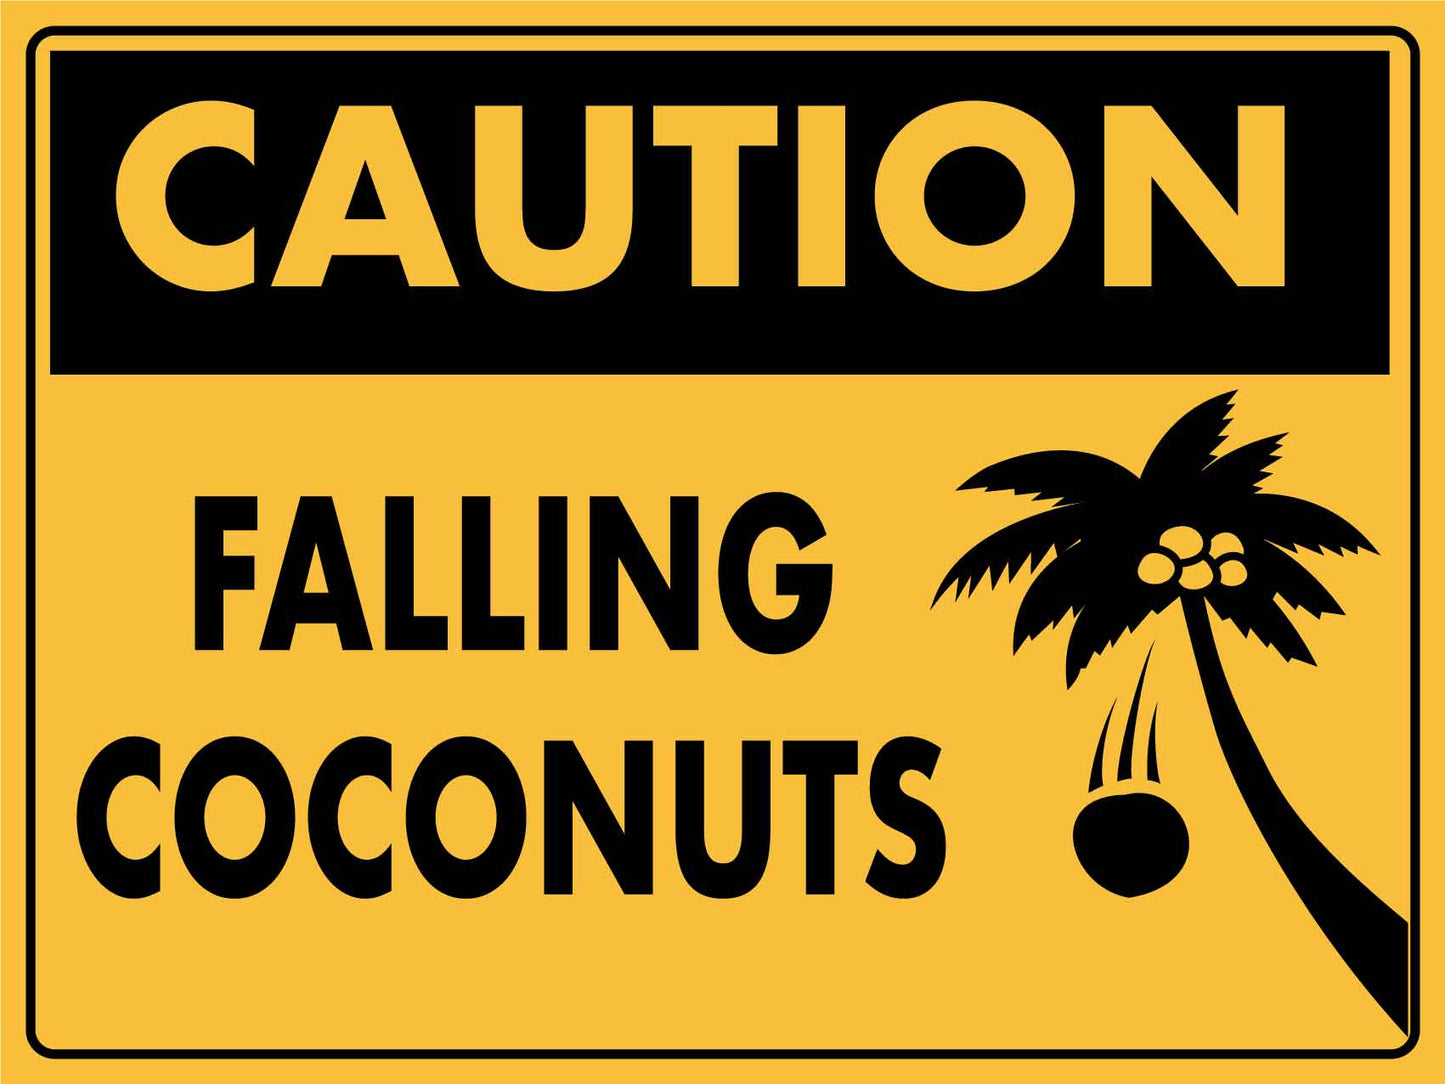 Caution Falling Coconuts Sign